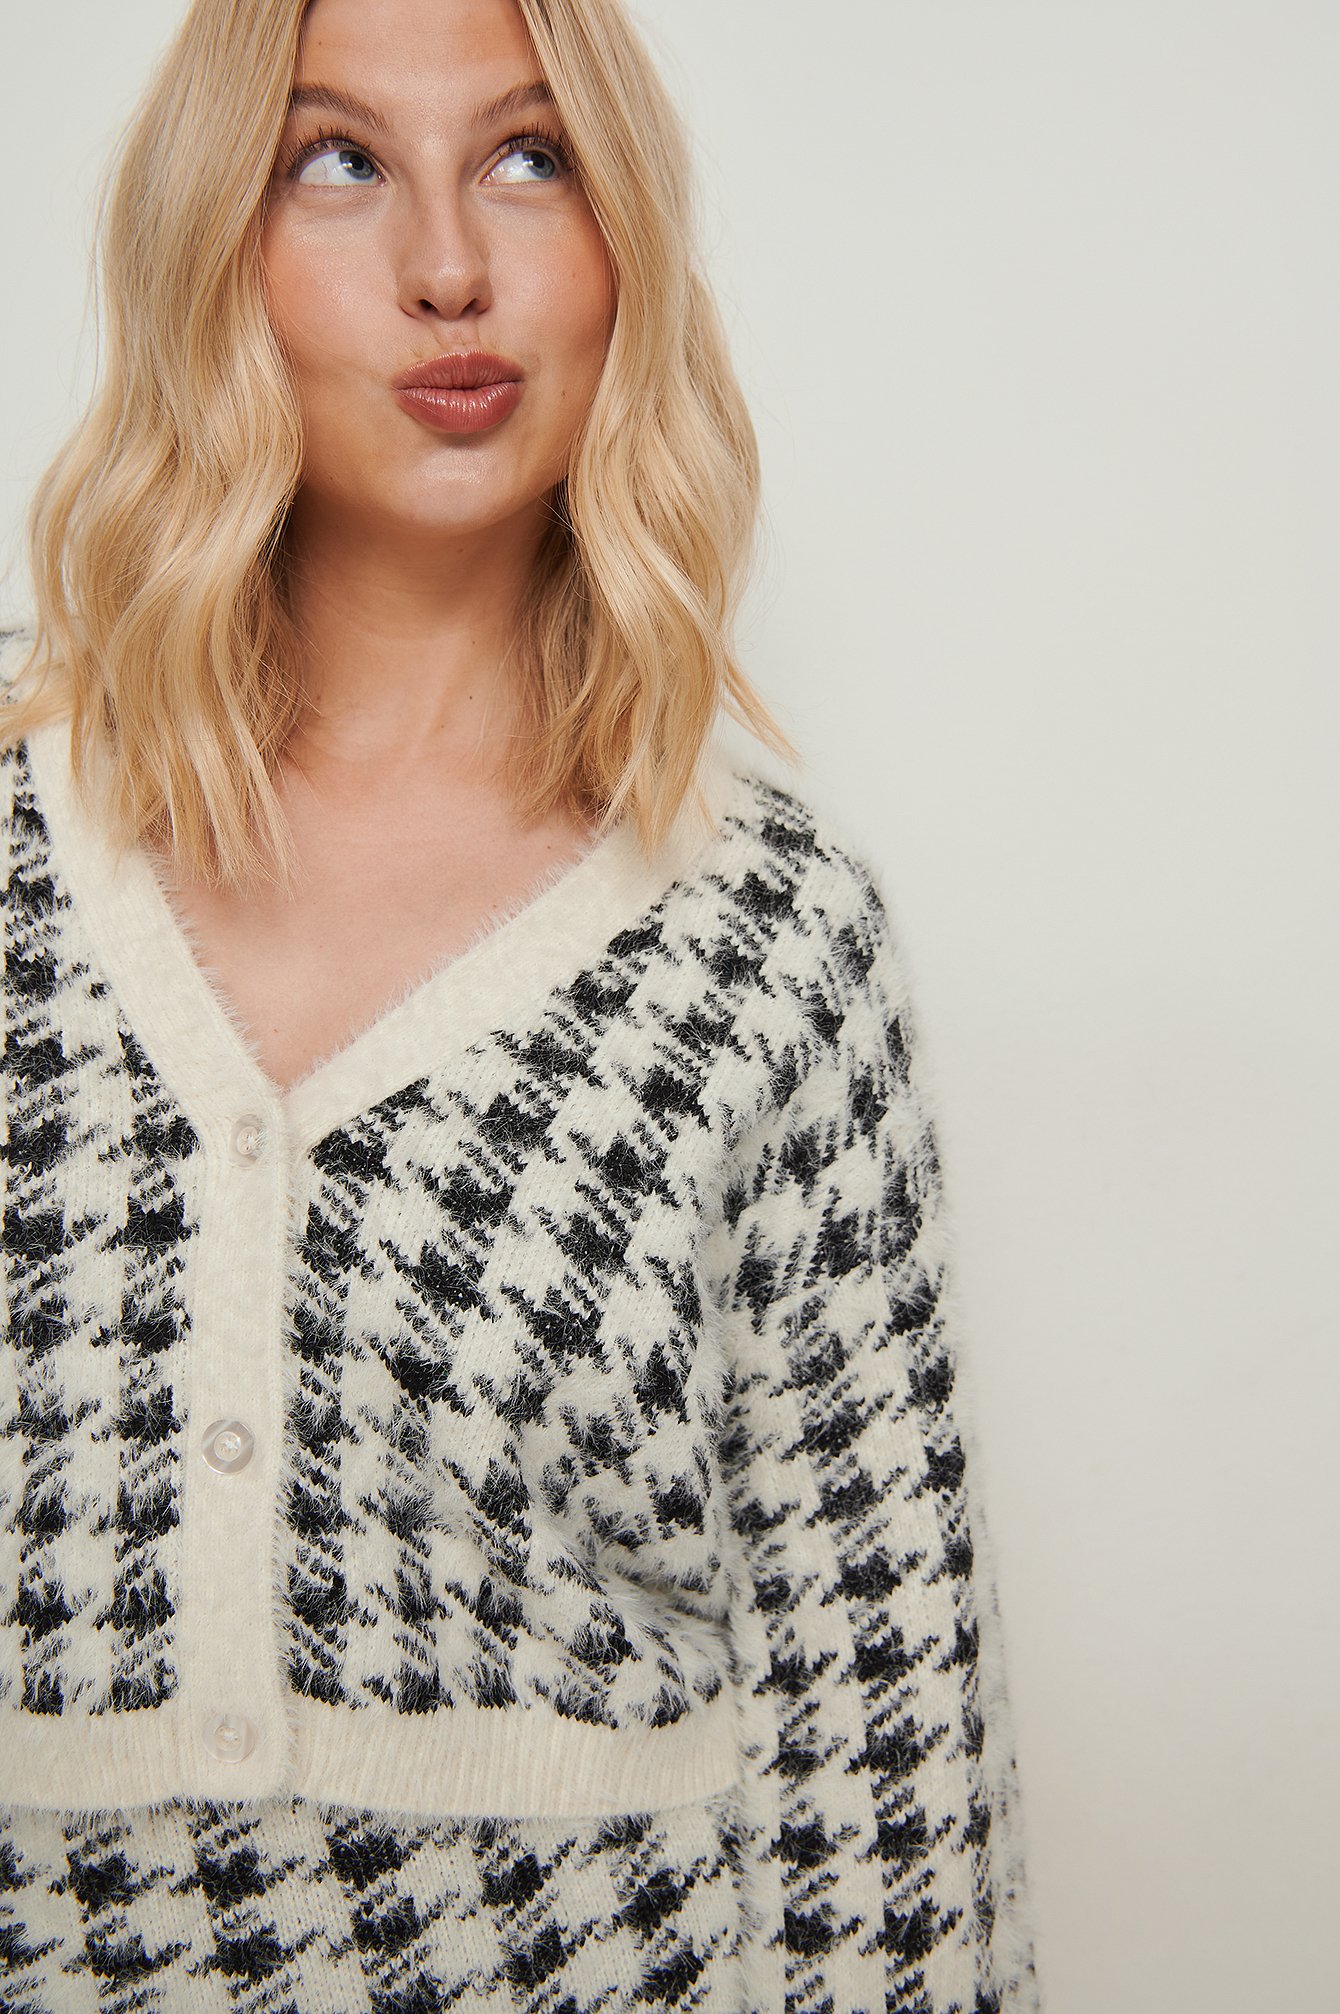 White/Black Checked Knitted Cardigan